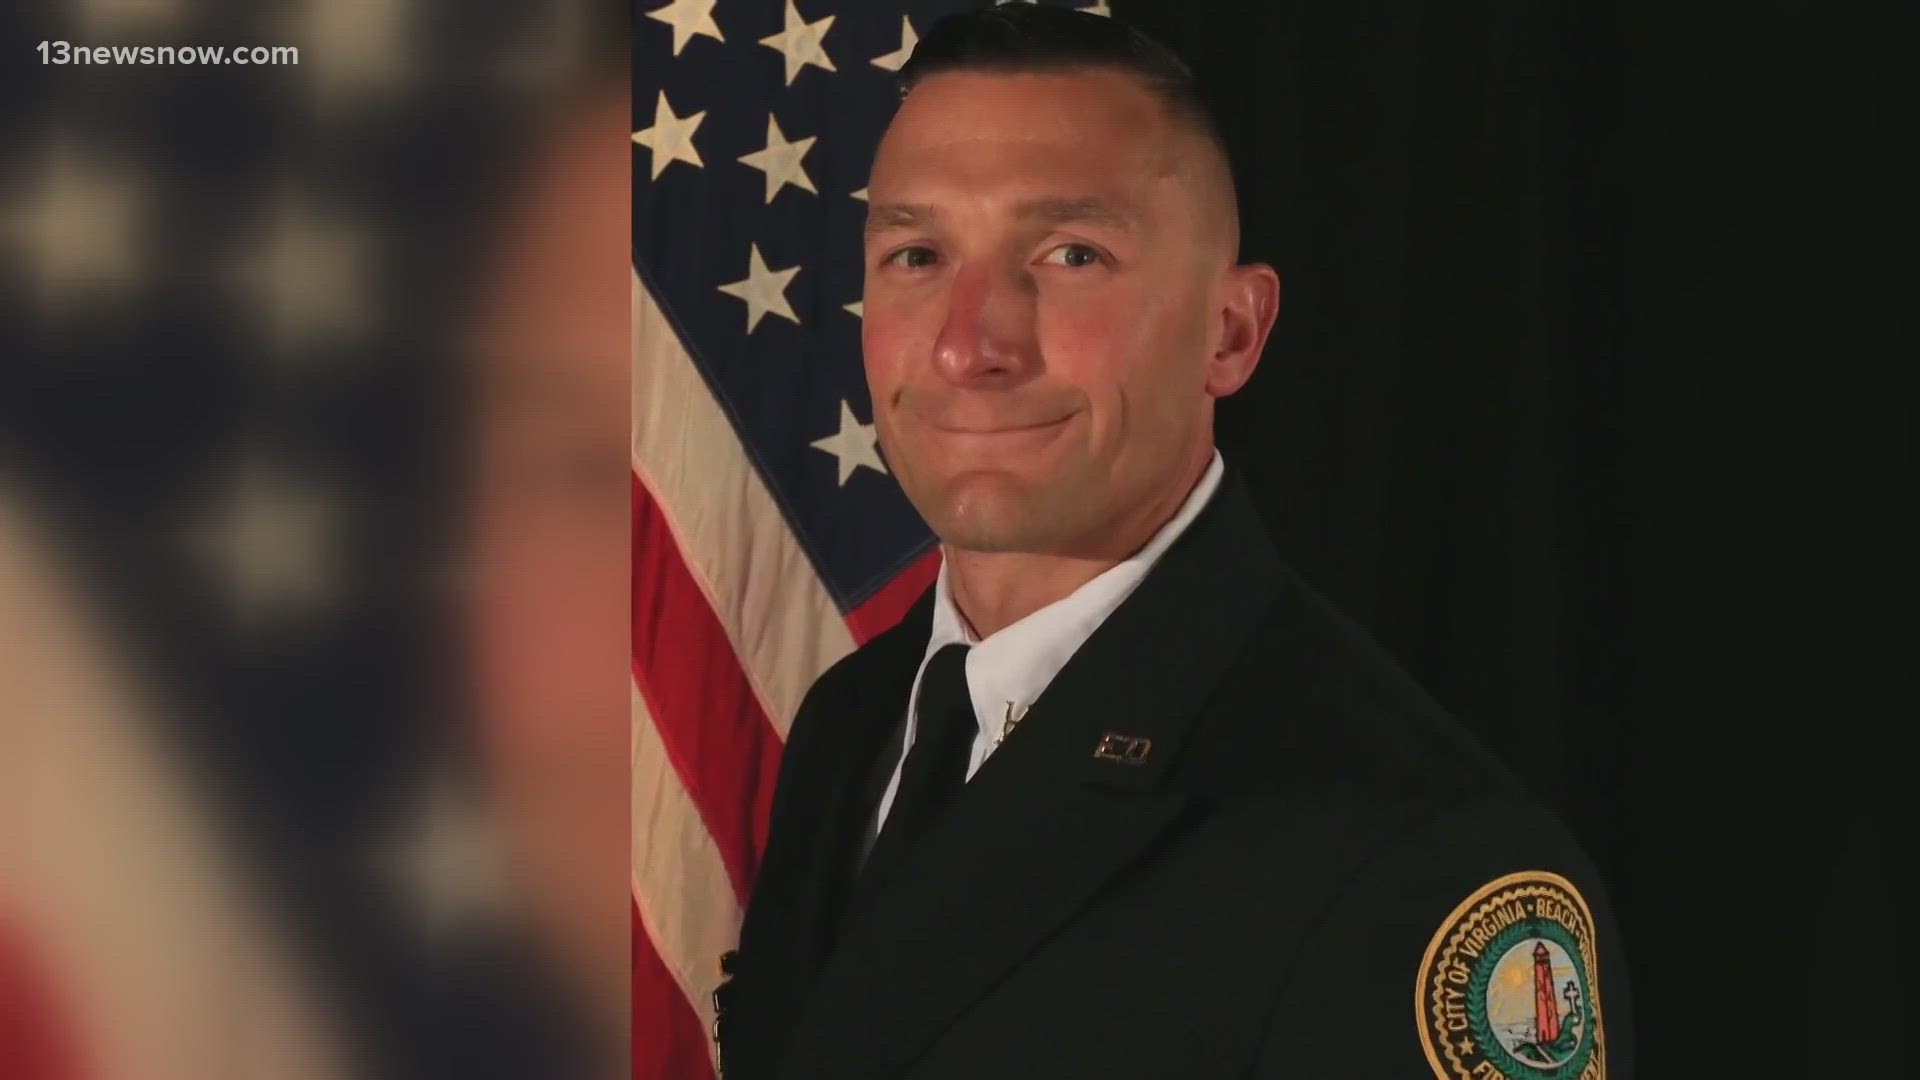 On Monday, loved ones and the community said goodbye to Virginia Beach Fire Captain Matt "Chevy" Chiaverotti.